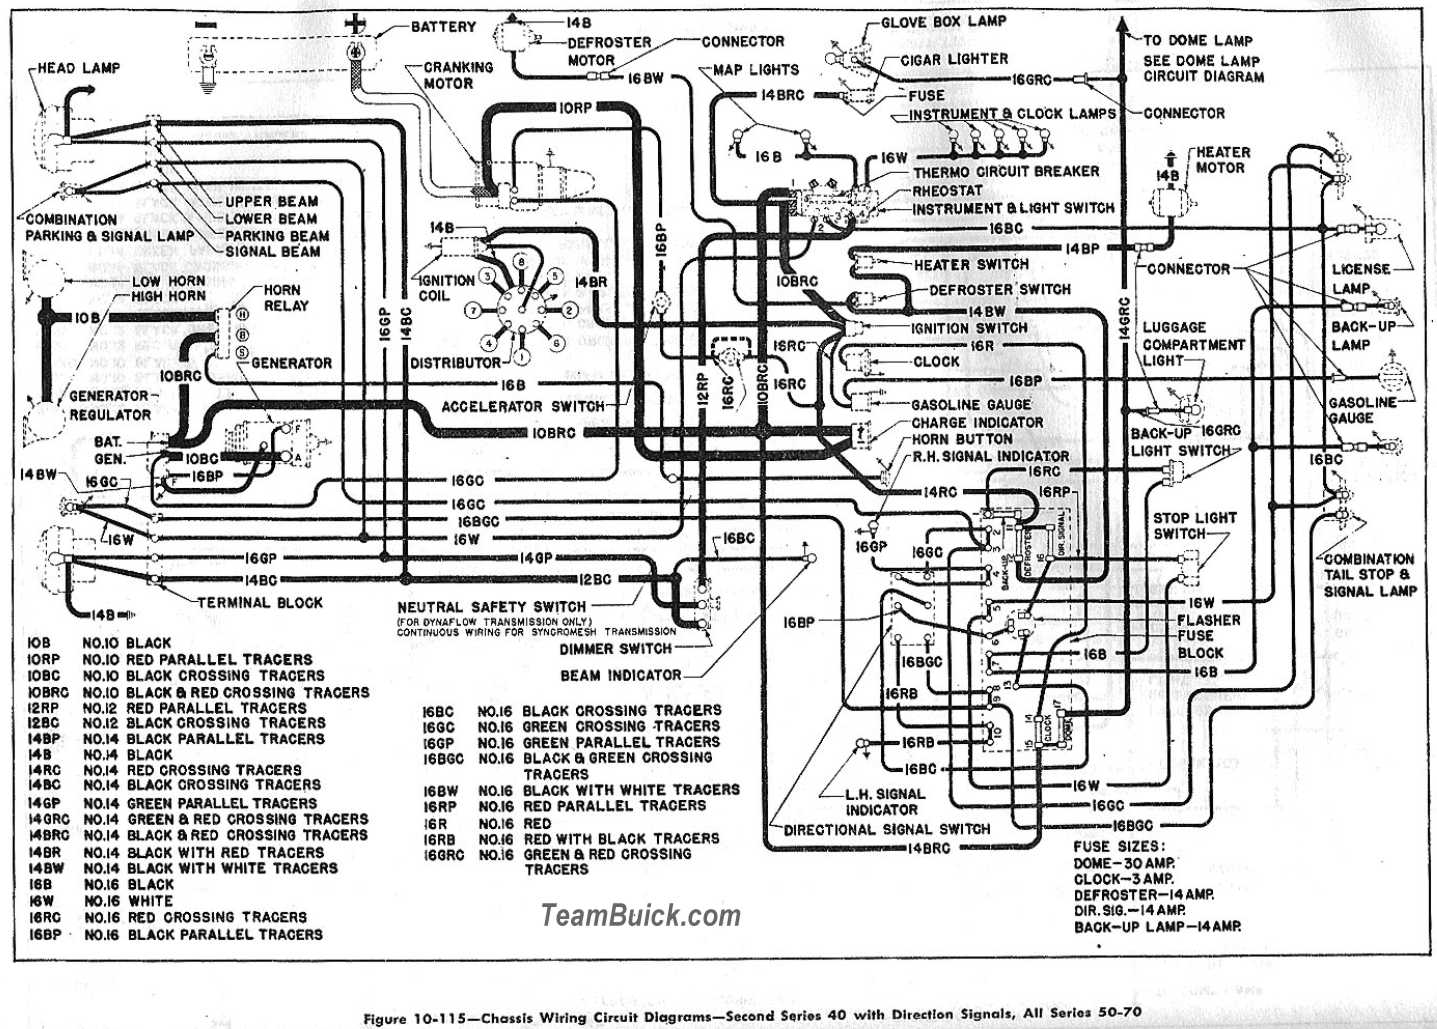 Buick Wiring Diagrams - Trusted Wiring Diagrams 96 buick century wiring diagram 